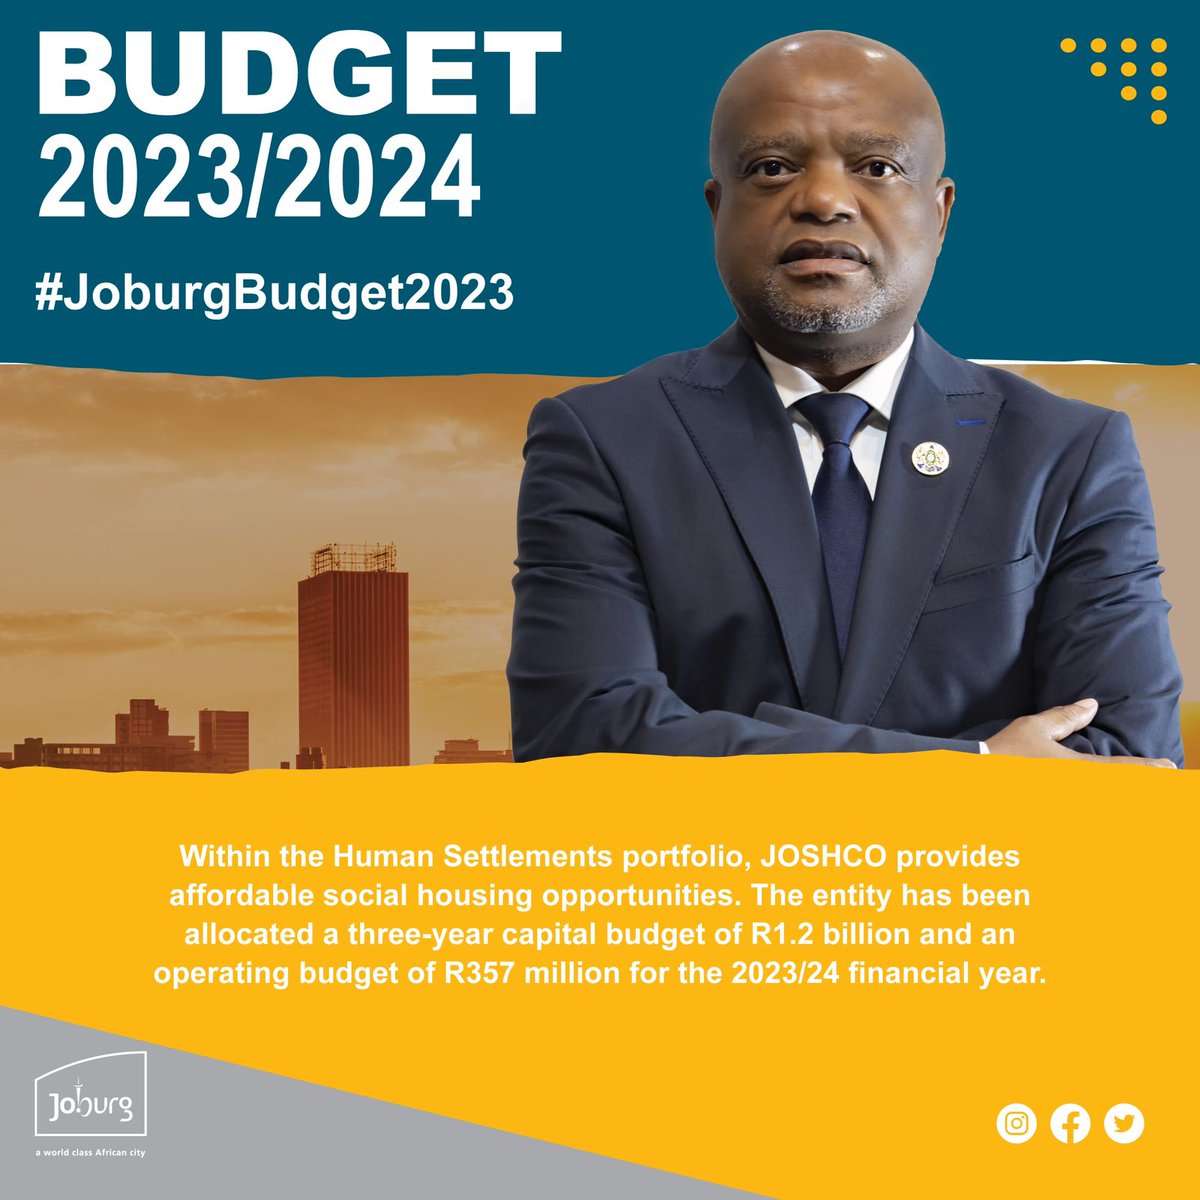 Jozi, check out the highlights from the budget speech. #JoburgBudget2023 #ICareIPay #KnowYourJoburg ^LM